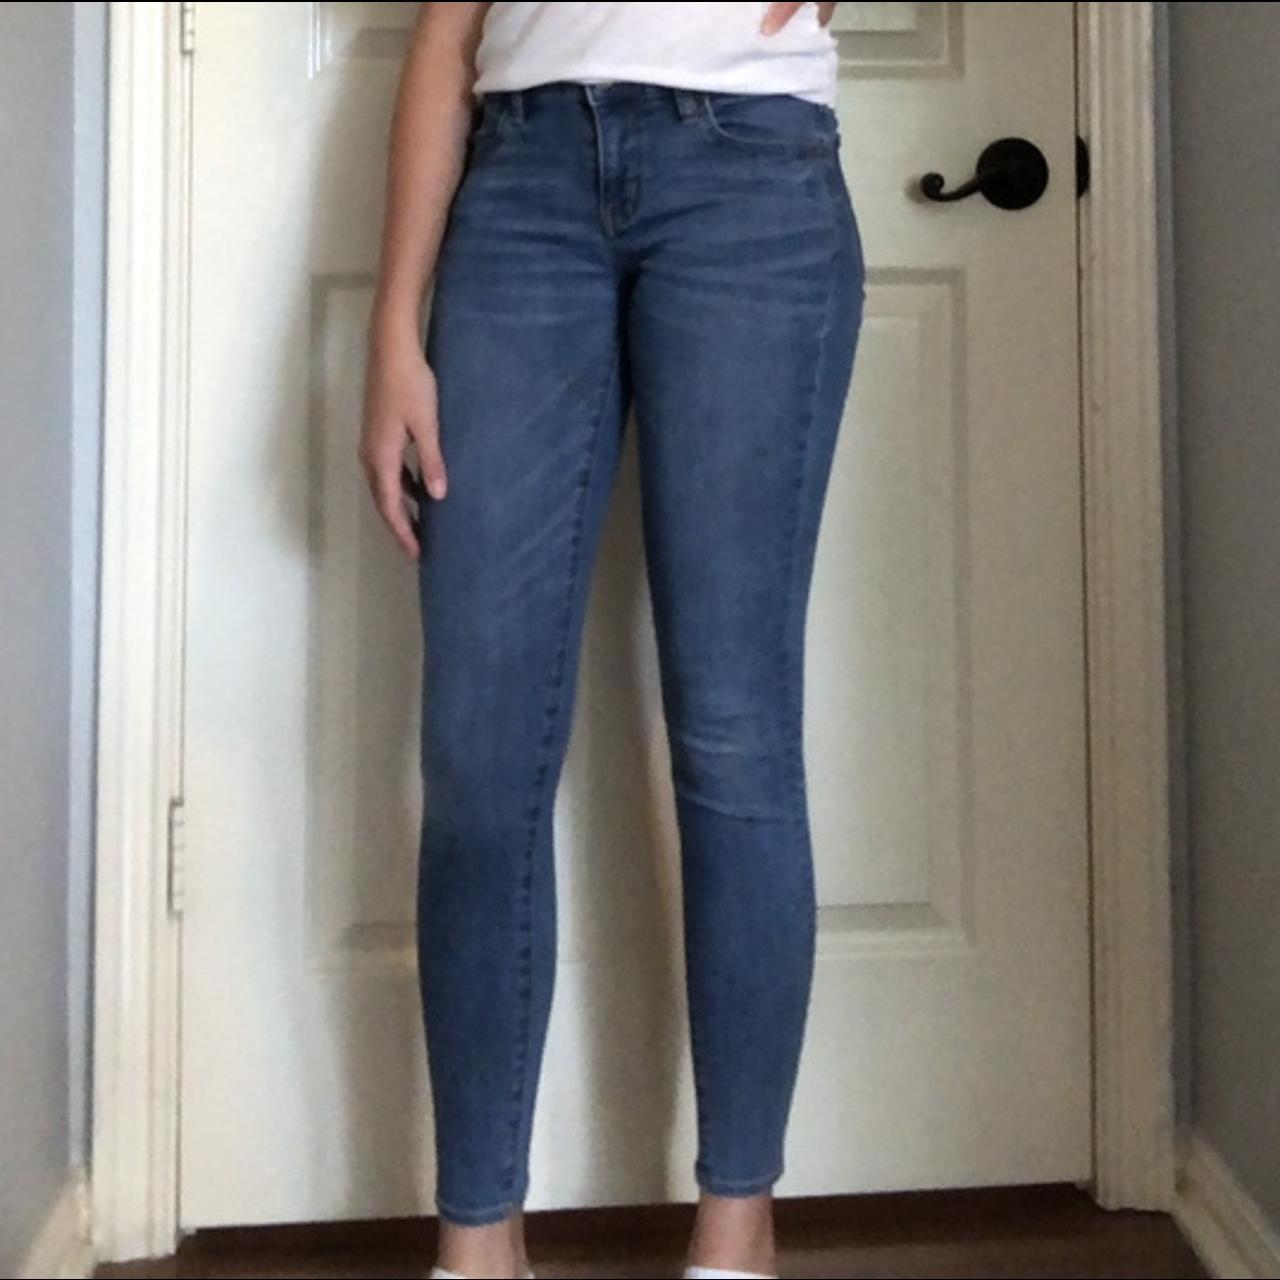 American Eagle blue jeans, dirt/grass stains on butt - Depop